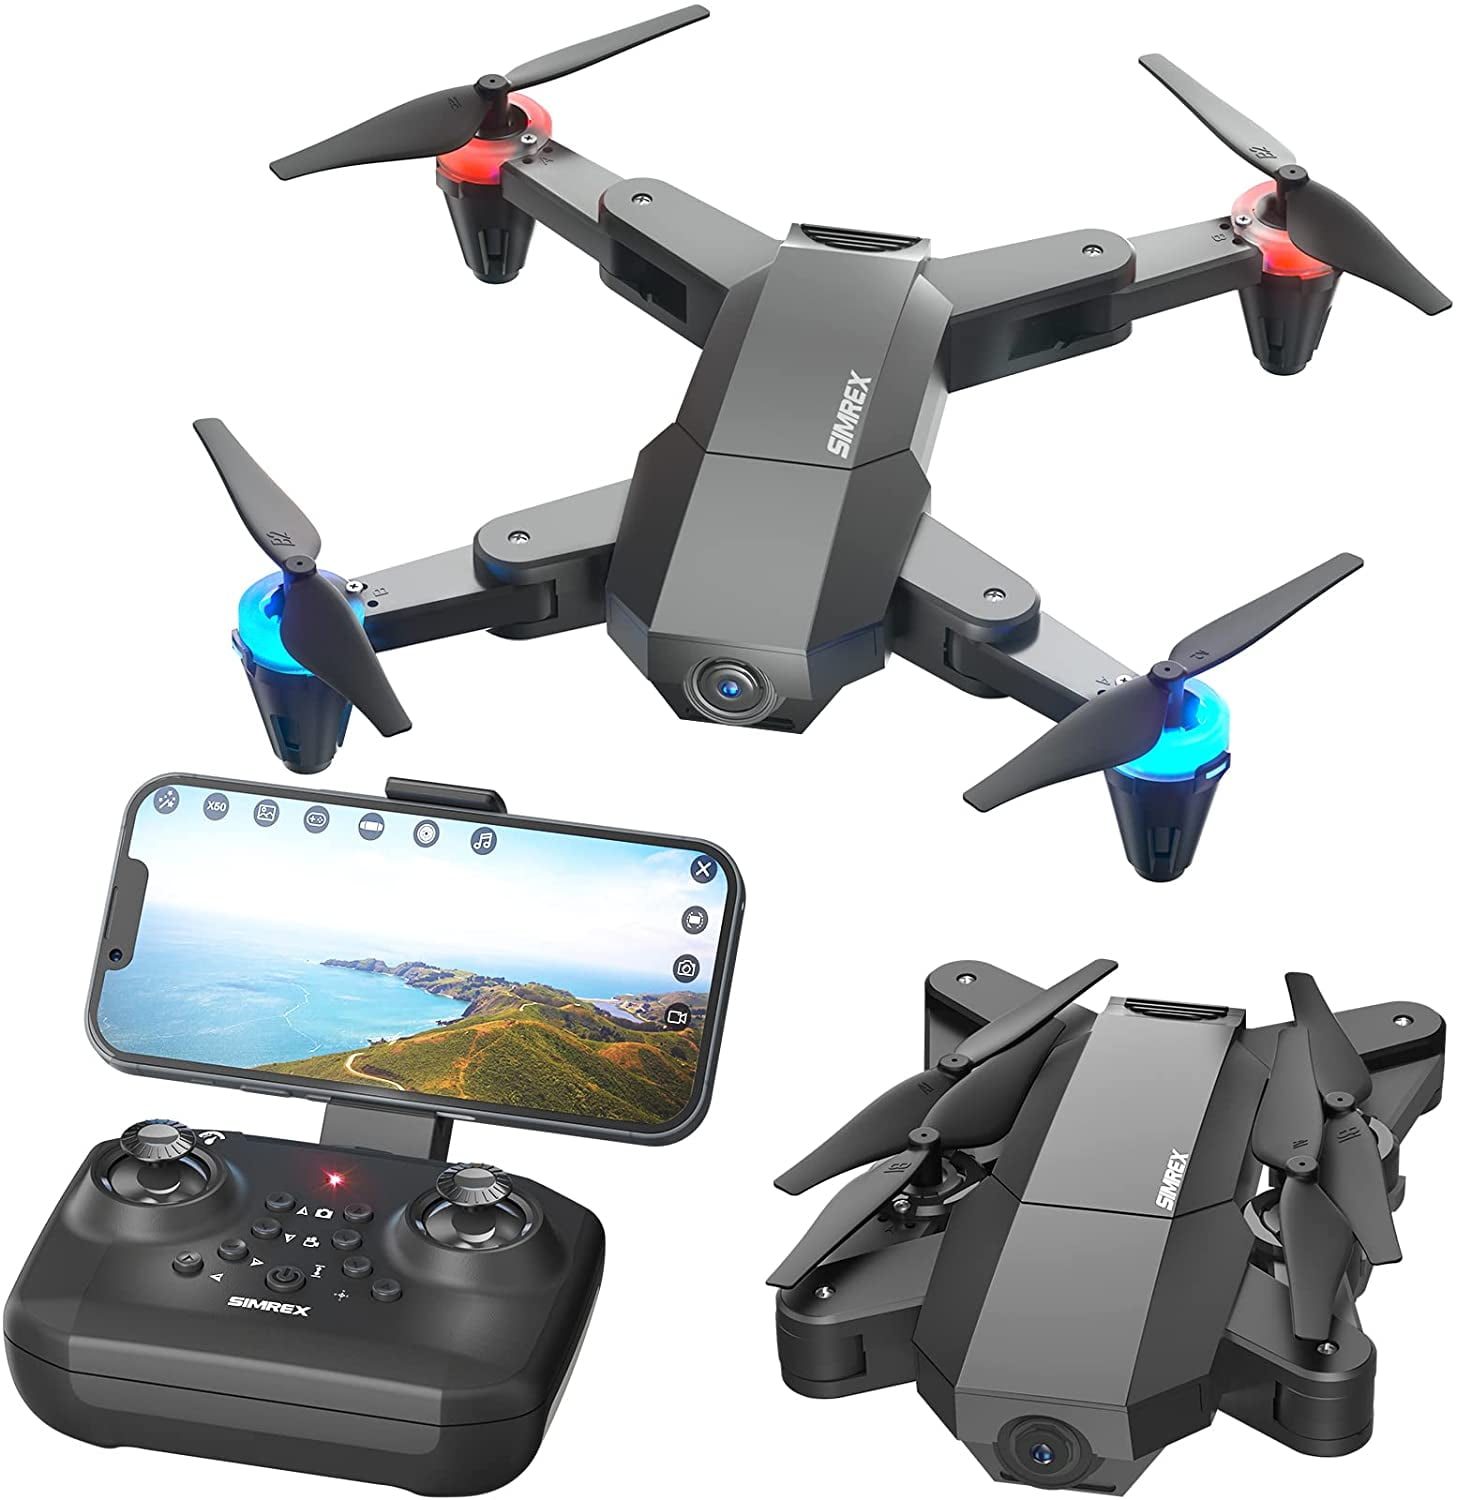 SIMREX X500 mini Drone Optical Flow Positioning RC Quadcopter with 720P HD  Camera, Altitude Hold Headless Mode, Foldable FPV Drones WiFi Live Video 3D